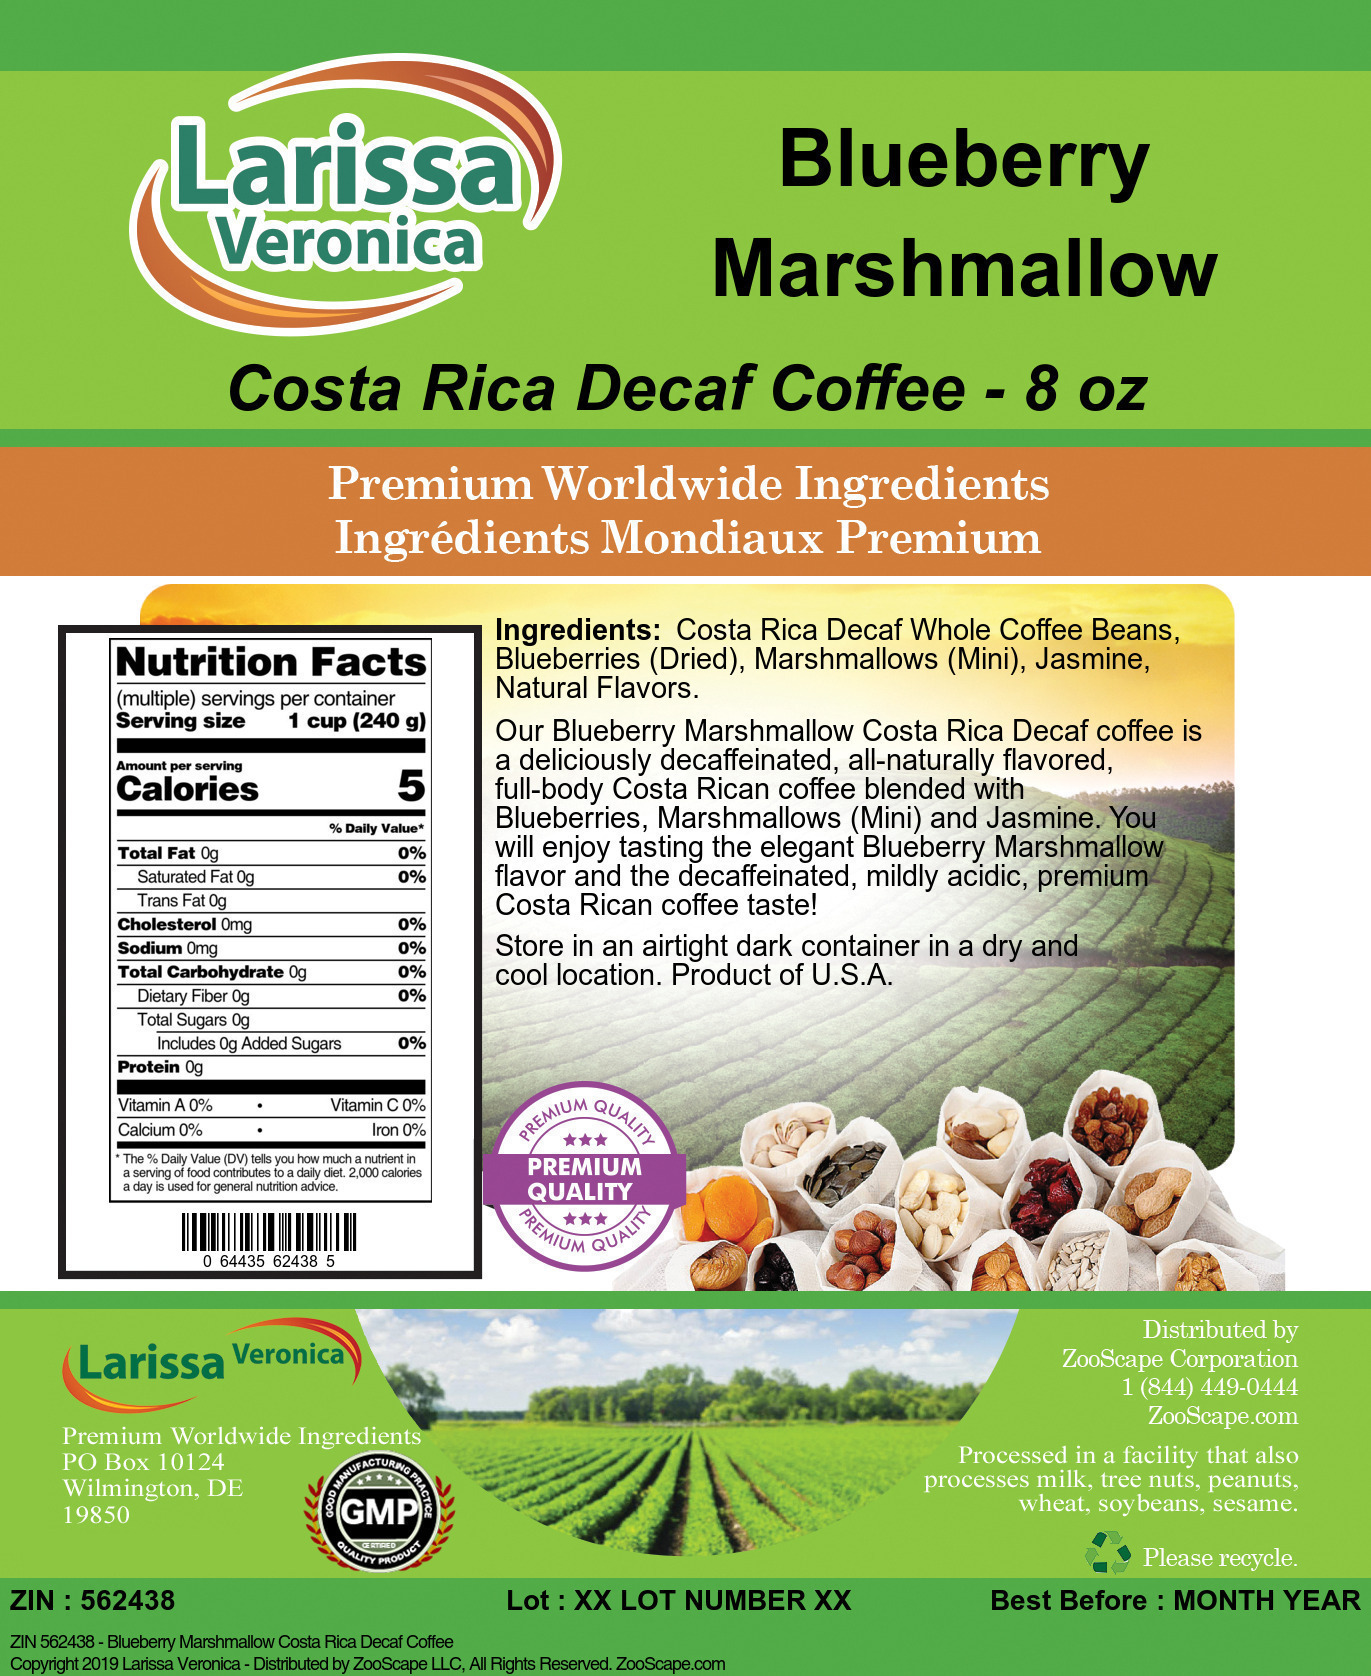 Blueberry Marshmallow Costa Rica Decaf Coffee - Label